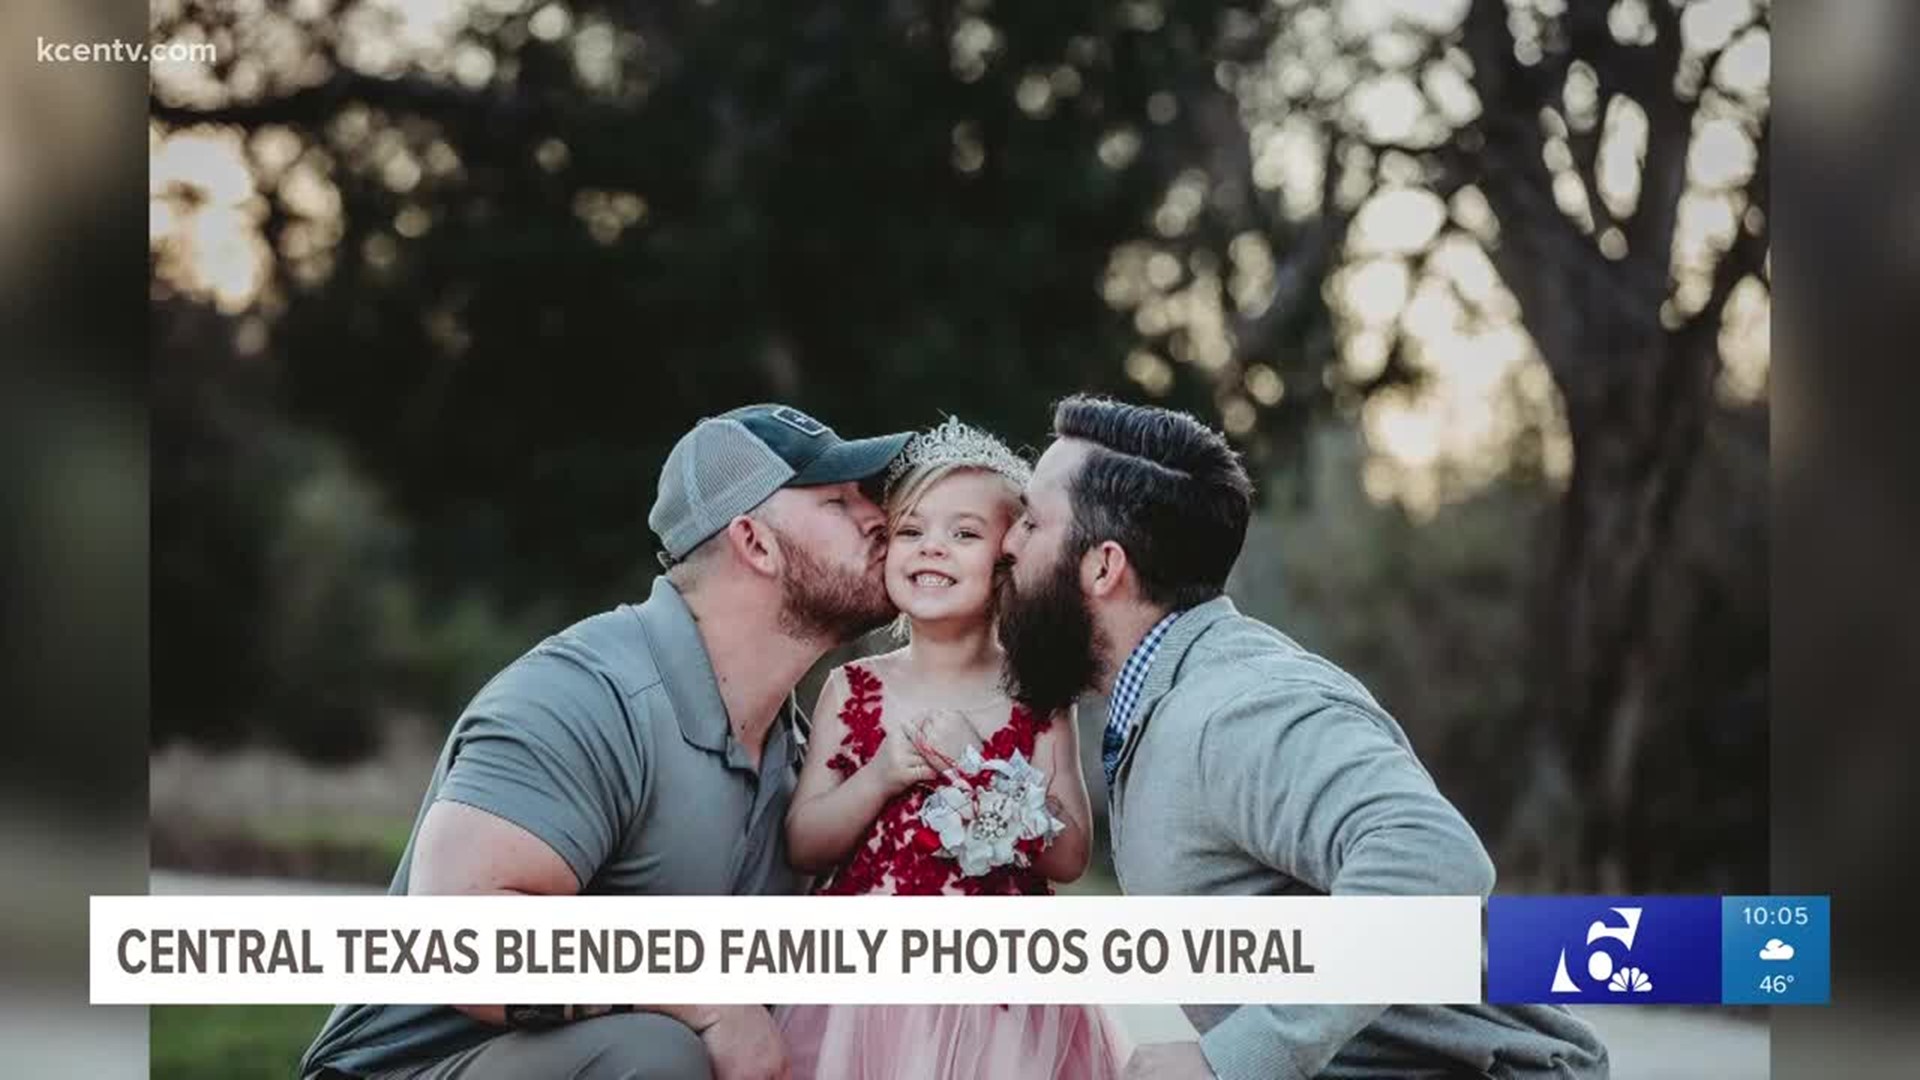 Photo of Texas stepdad, biological father and their daughter goes viral